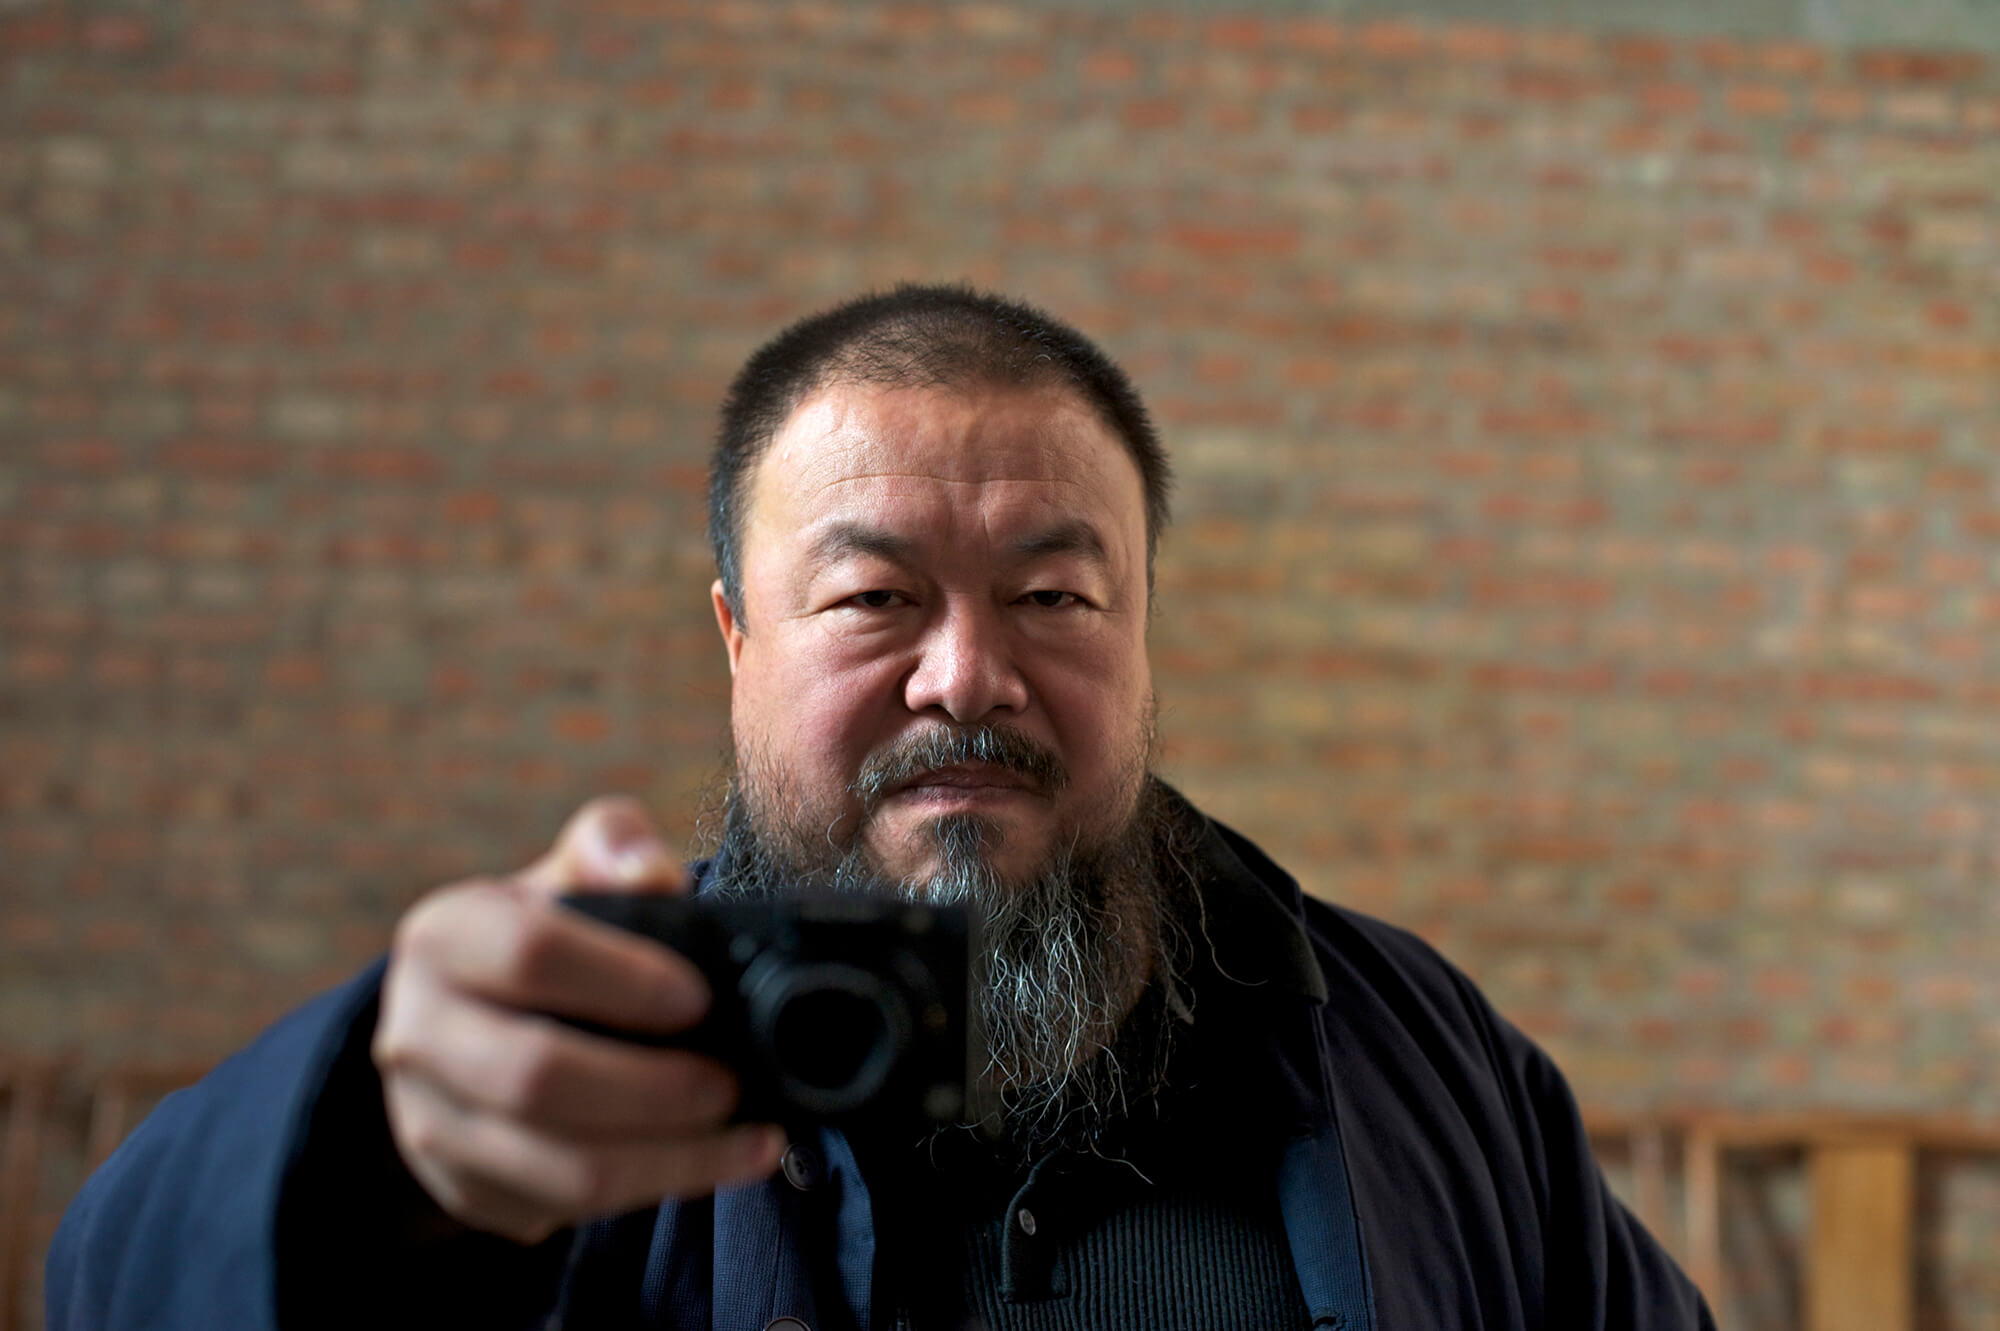 Selfie of Ai Wei Wei. He is aiming with a camera in front of a mirror.